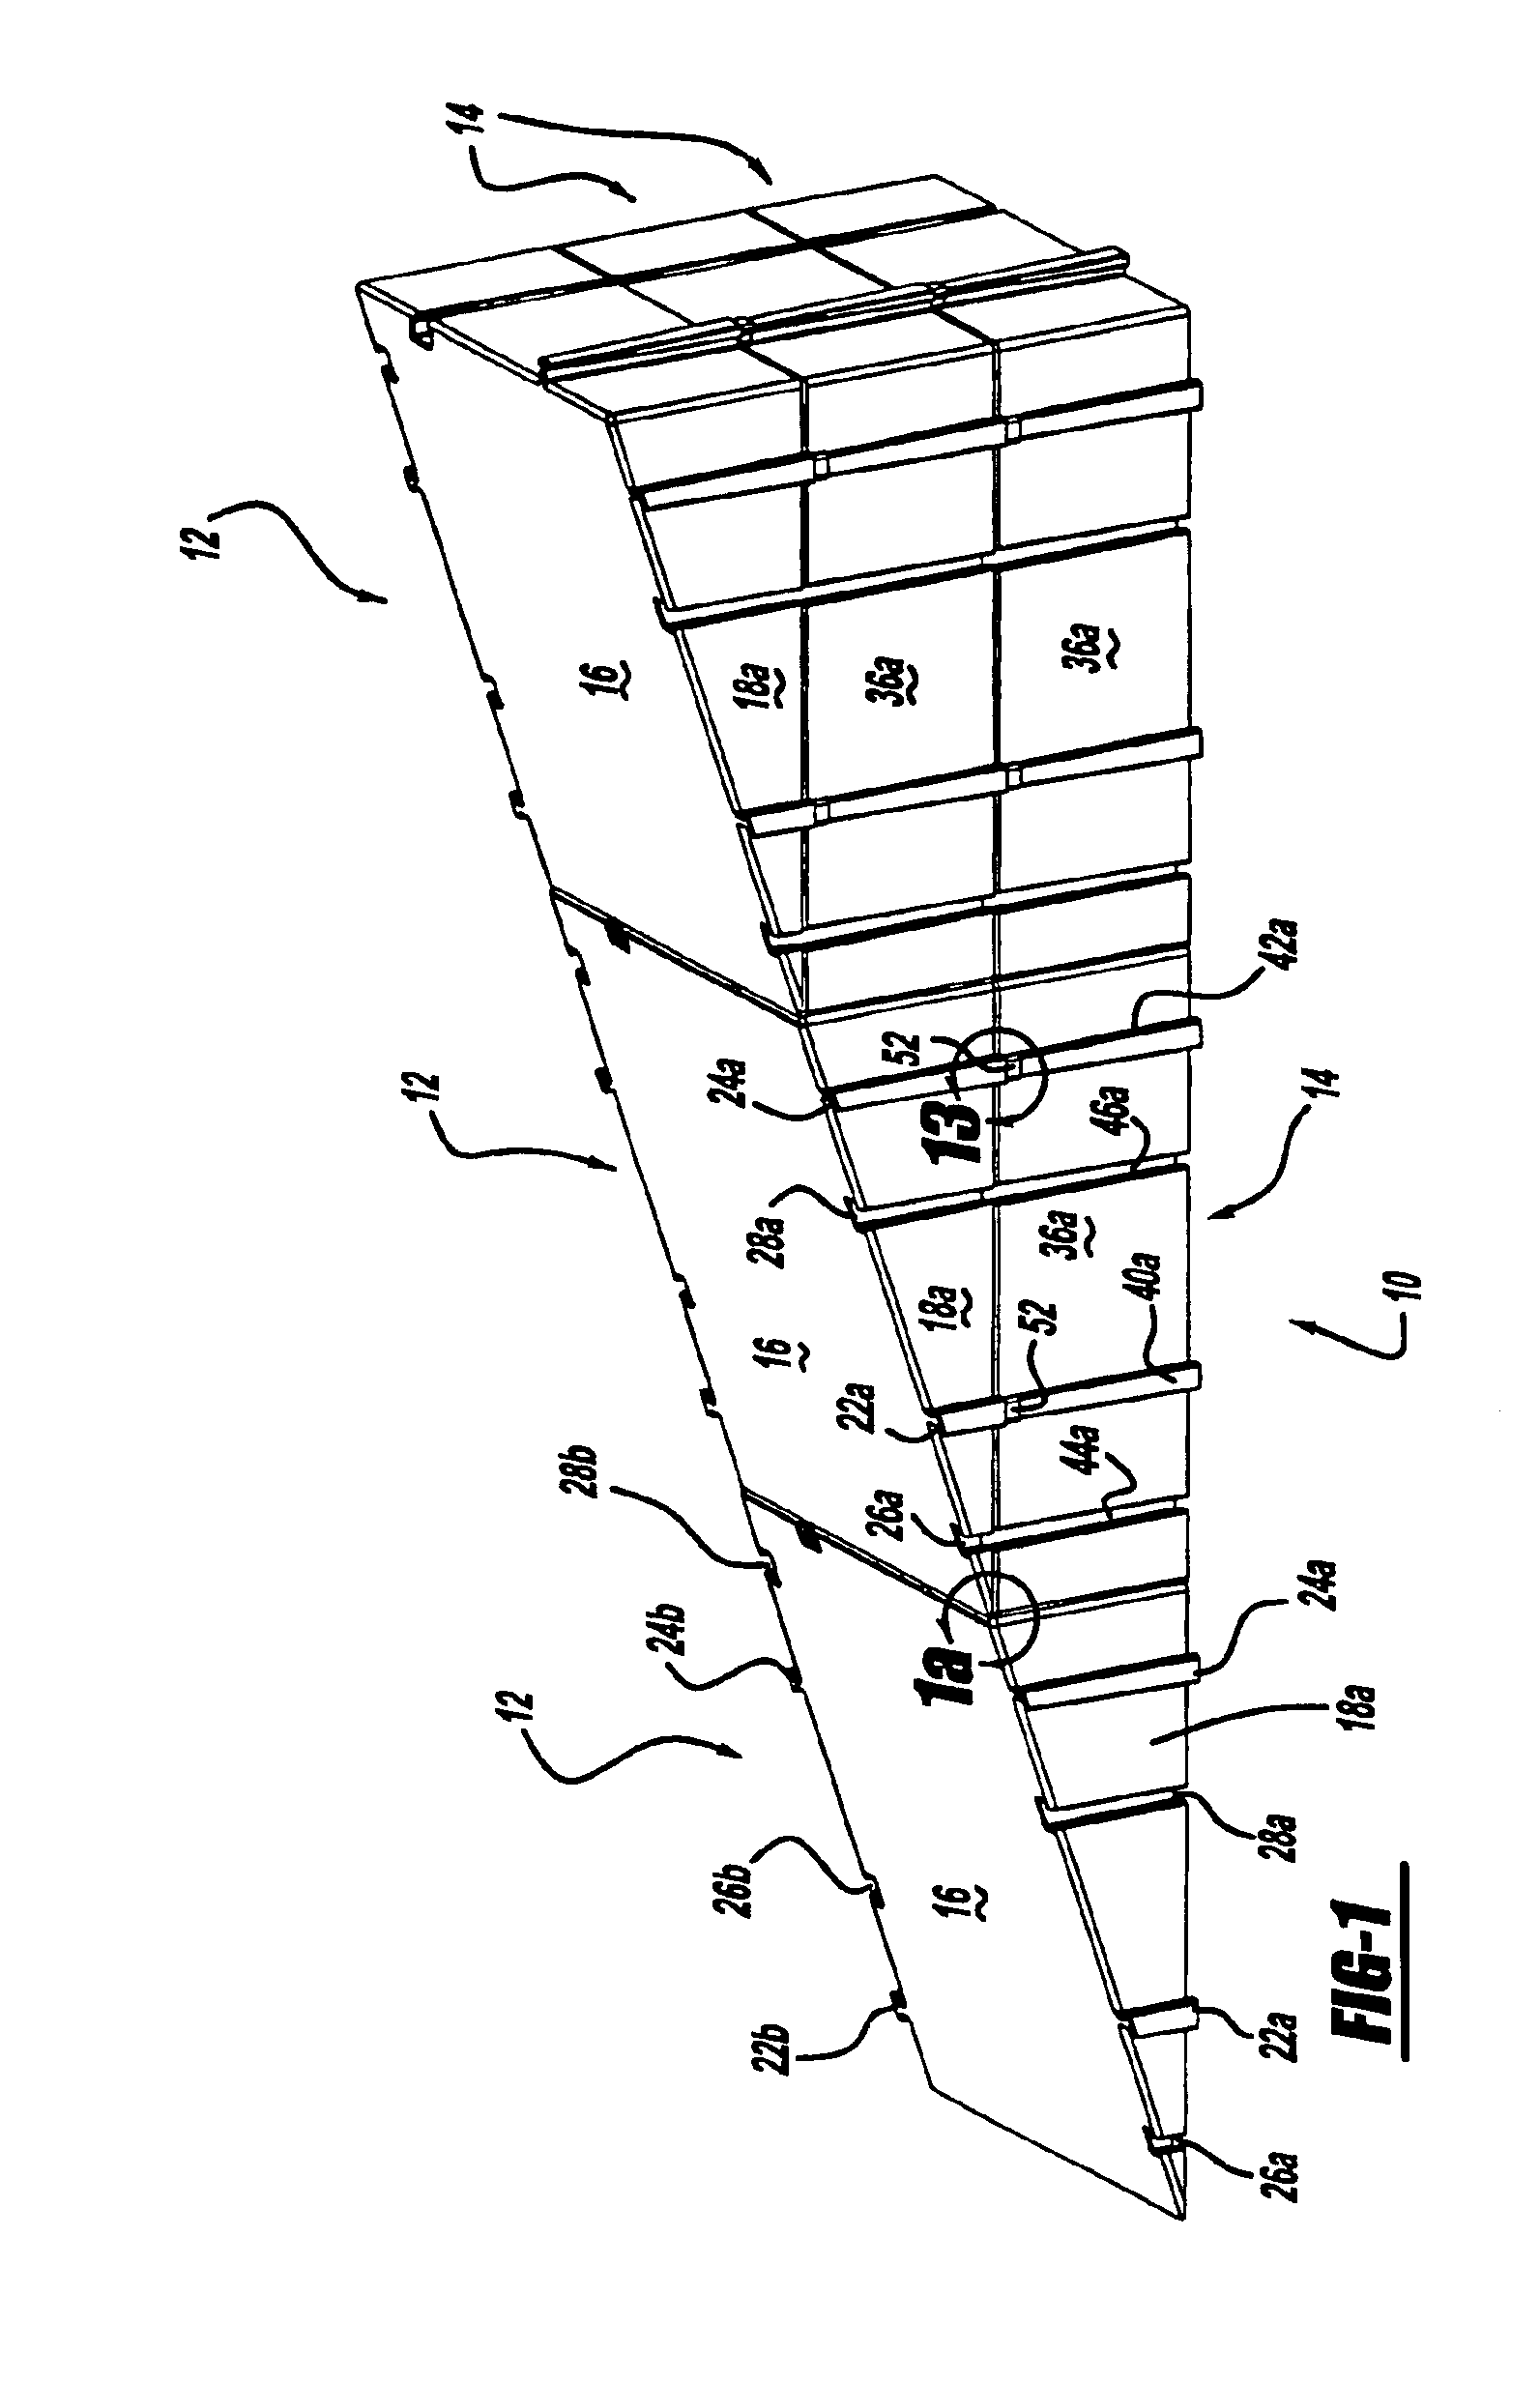 Variable ramp assemblies and system therefor